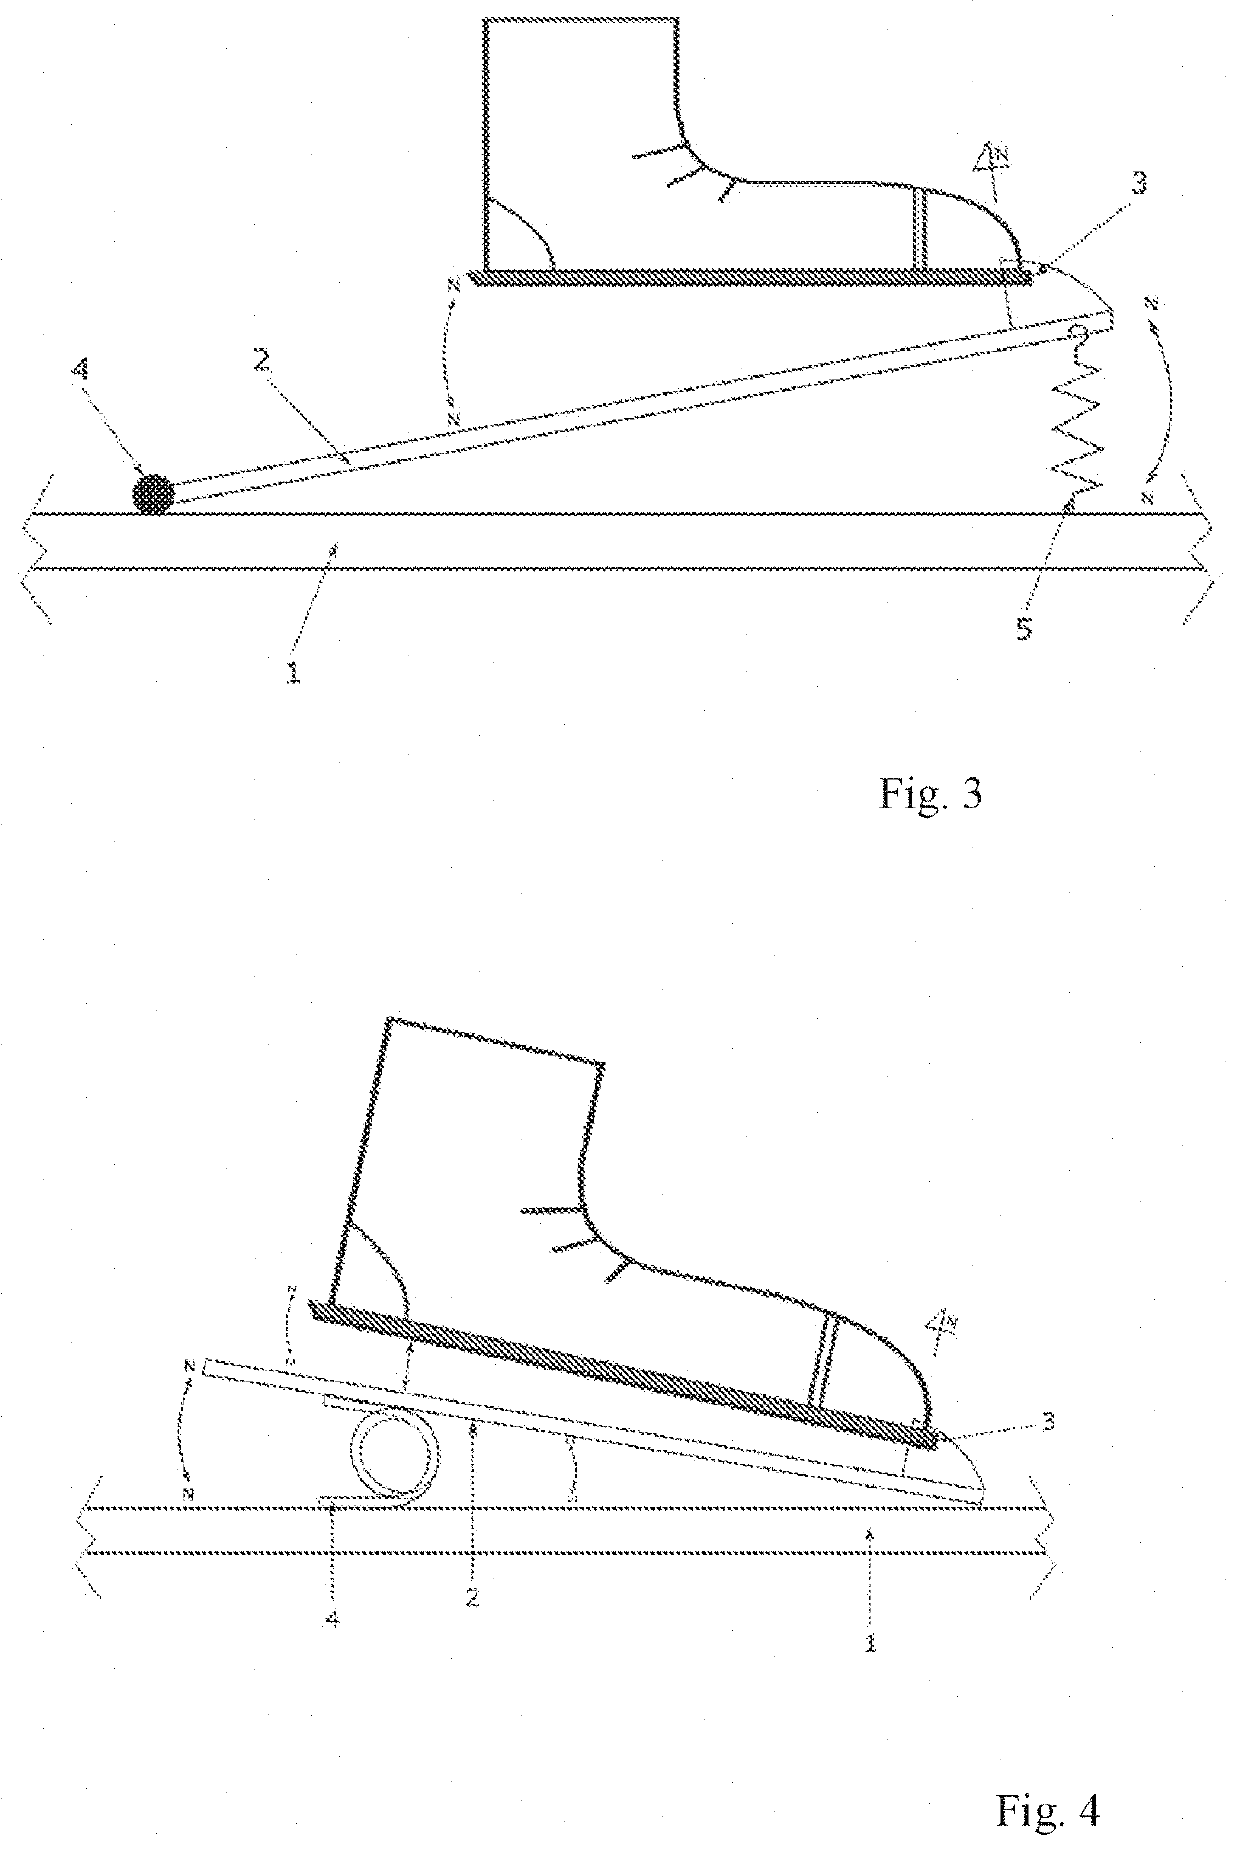 Binding allowing lifting of the front as well as the heel of the users foot